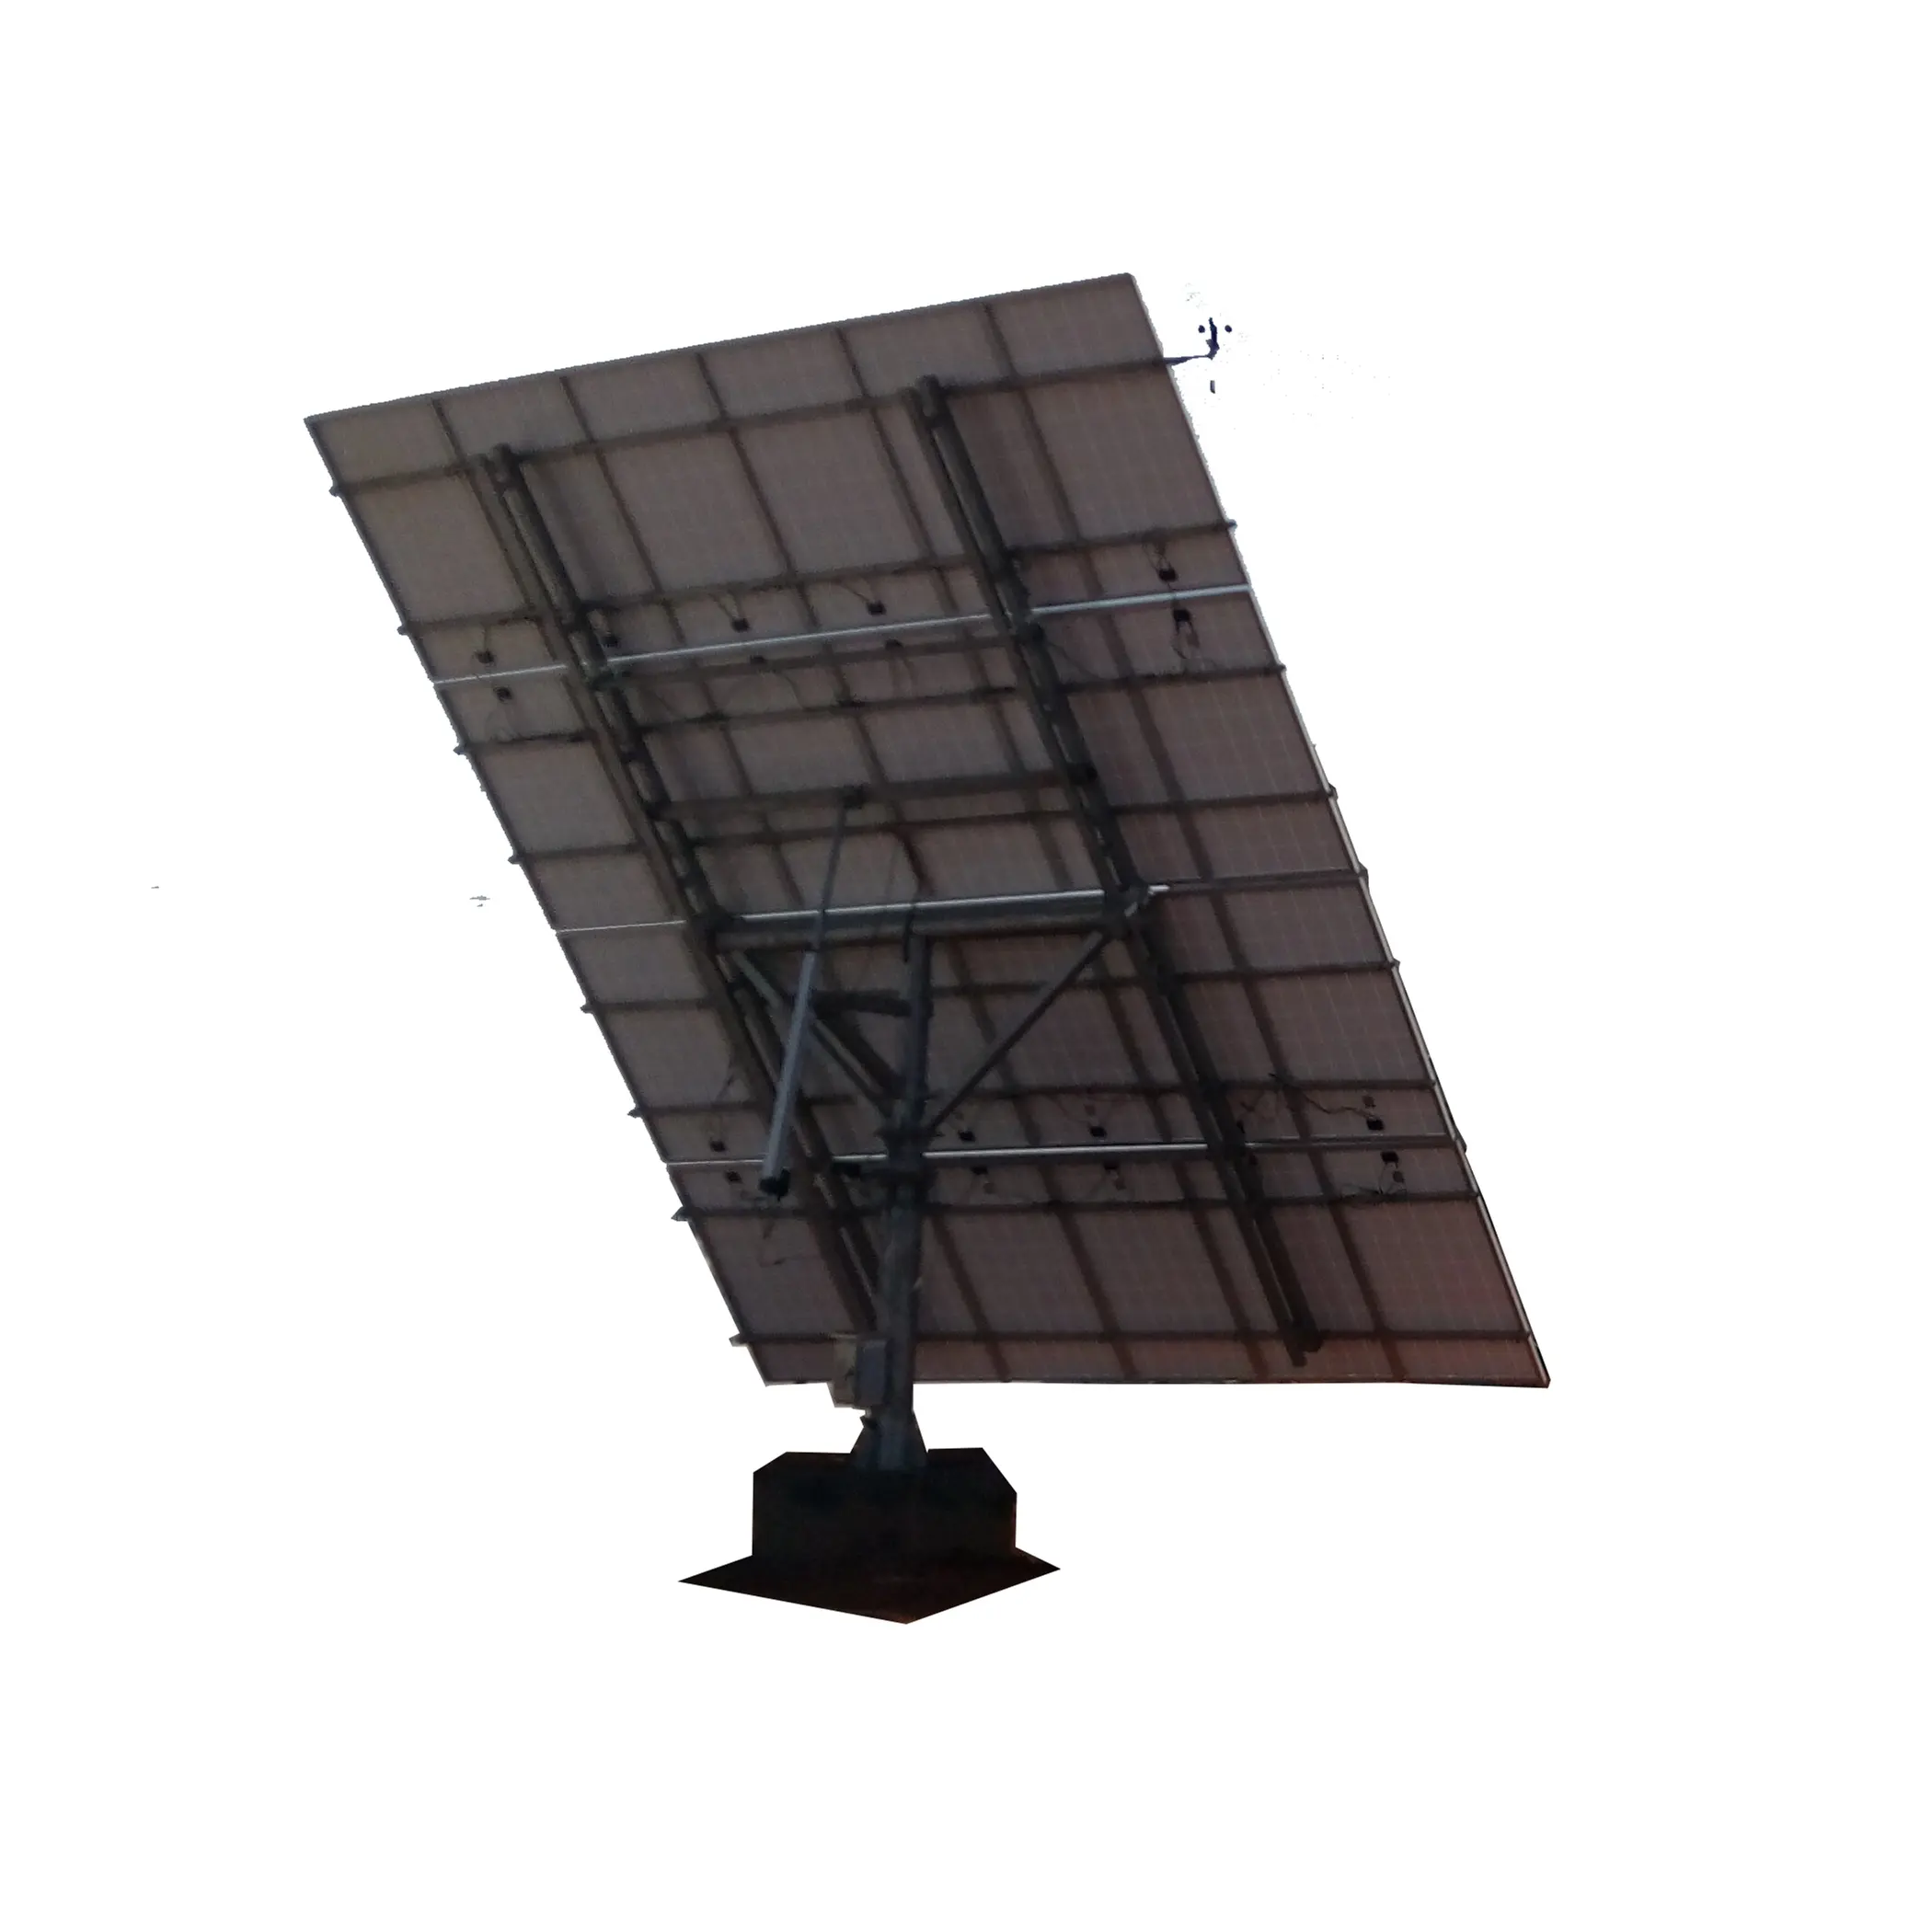 7.5kw Power generation dual 2 axis tracker solar tracking system sun photovoltaic solar panel pv system